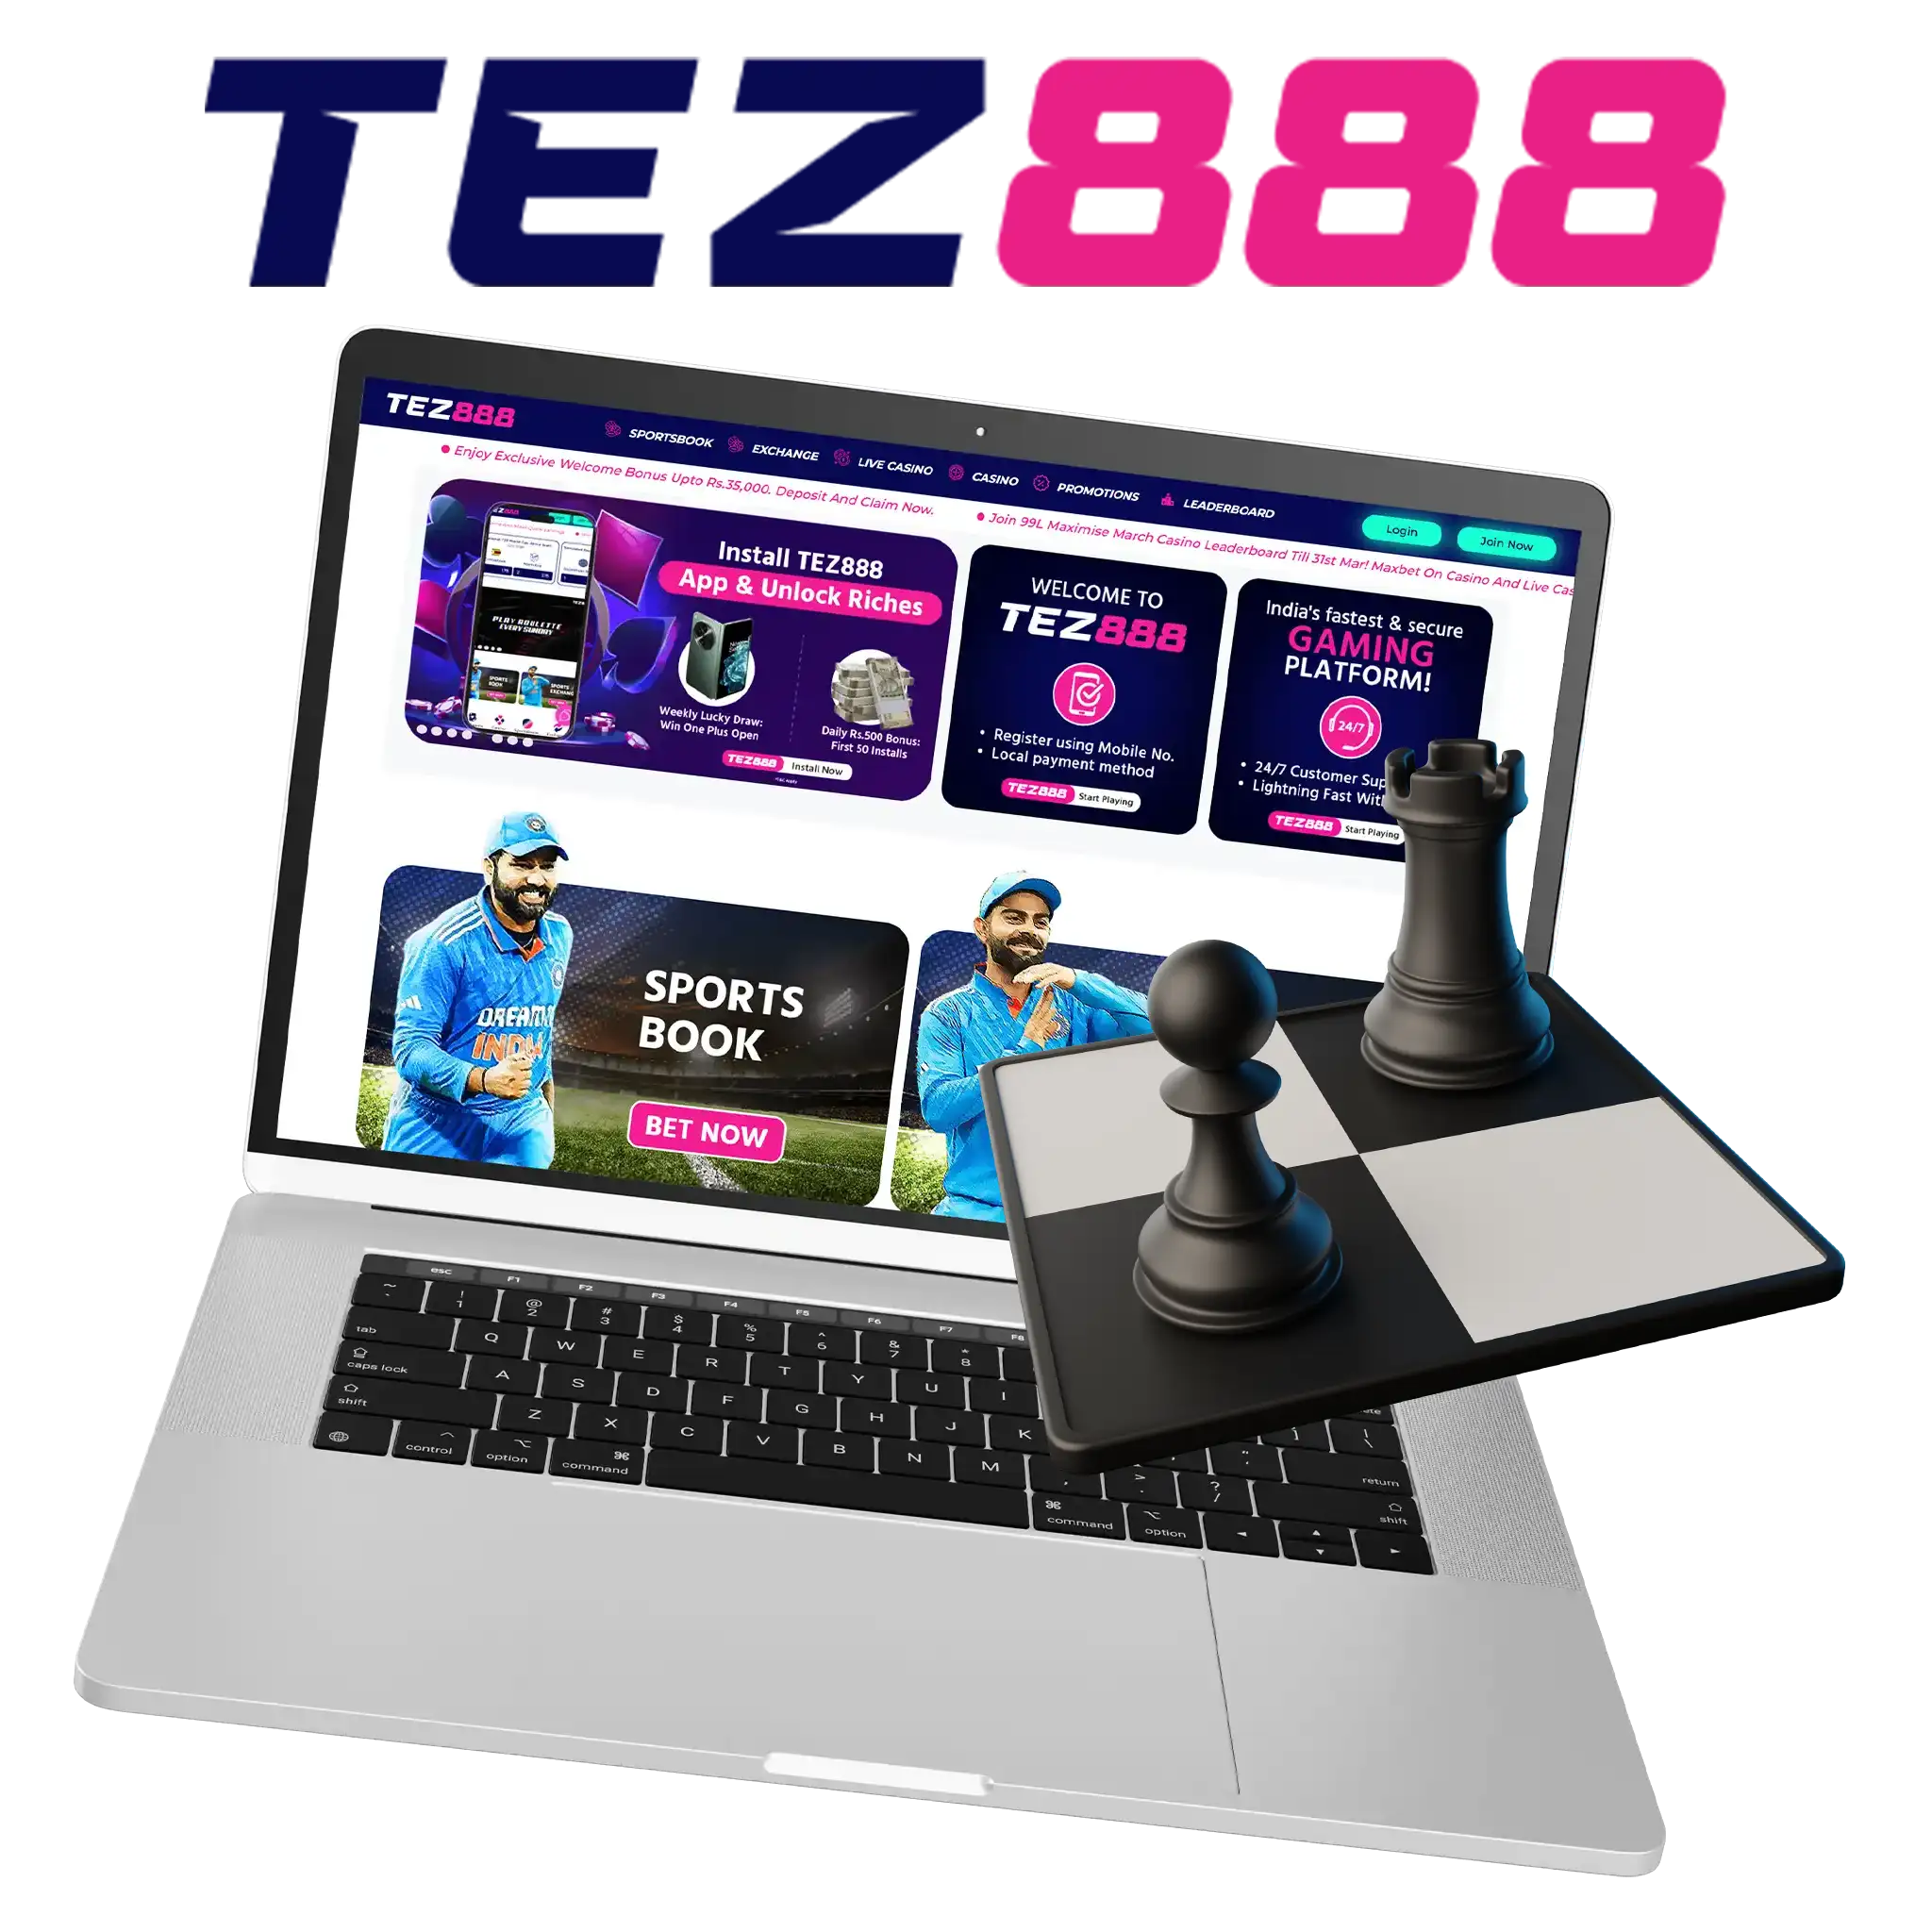 Tez888 supports Hindi language for convenient chess betting.